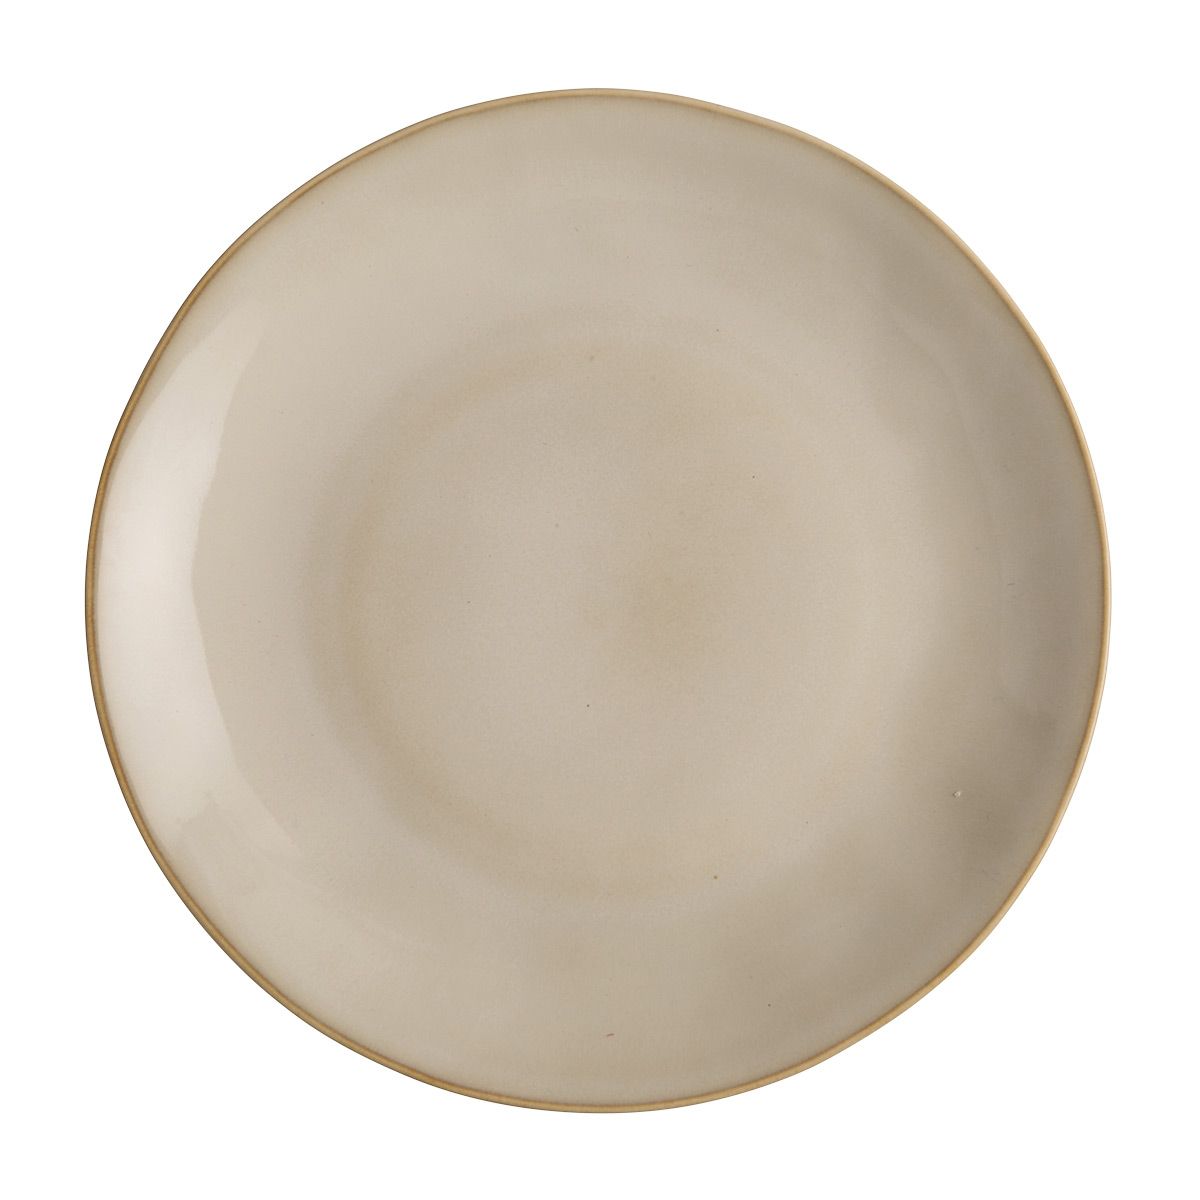 Be Home Mate Dinner Plate | The Container Store